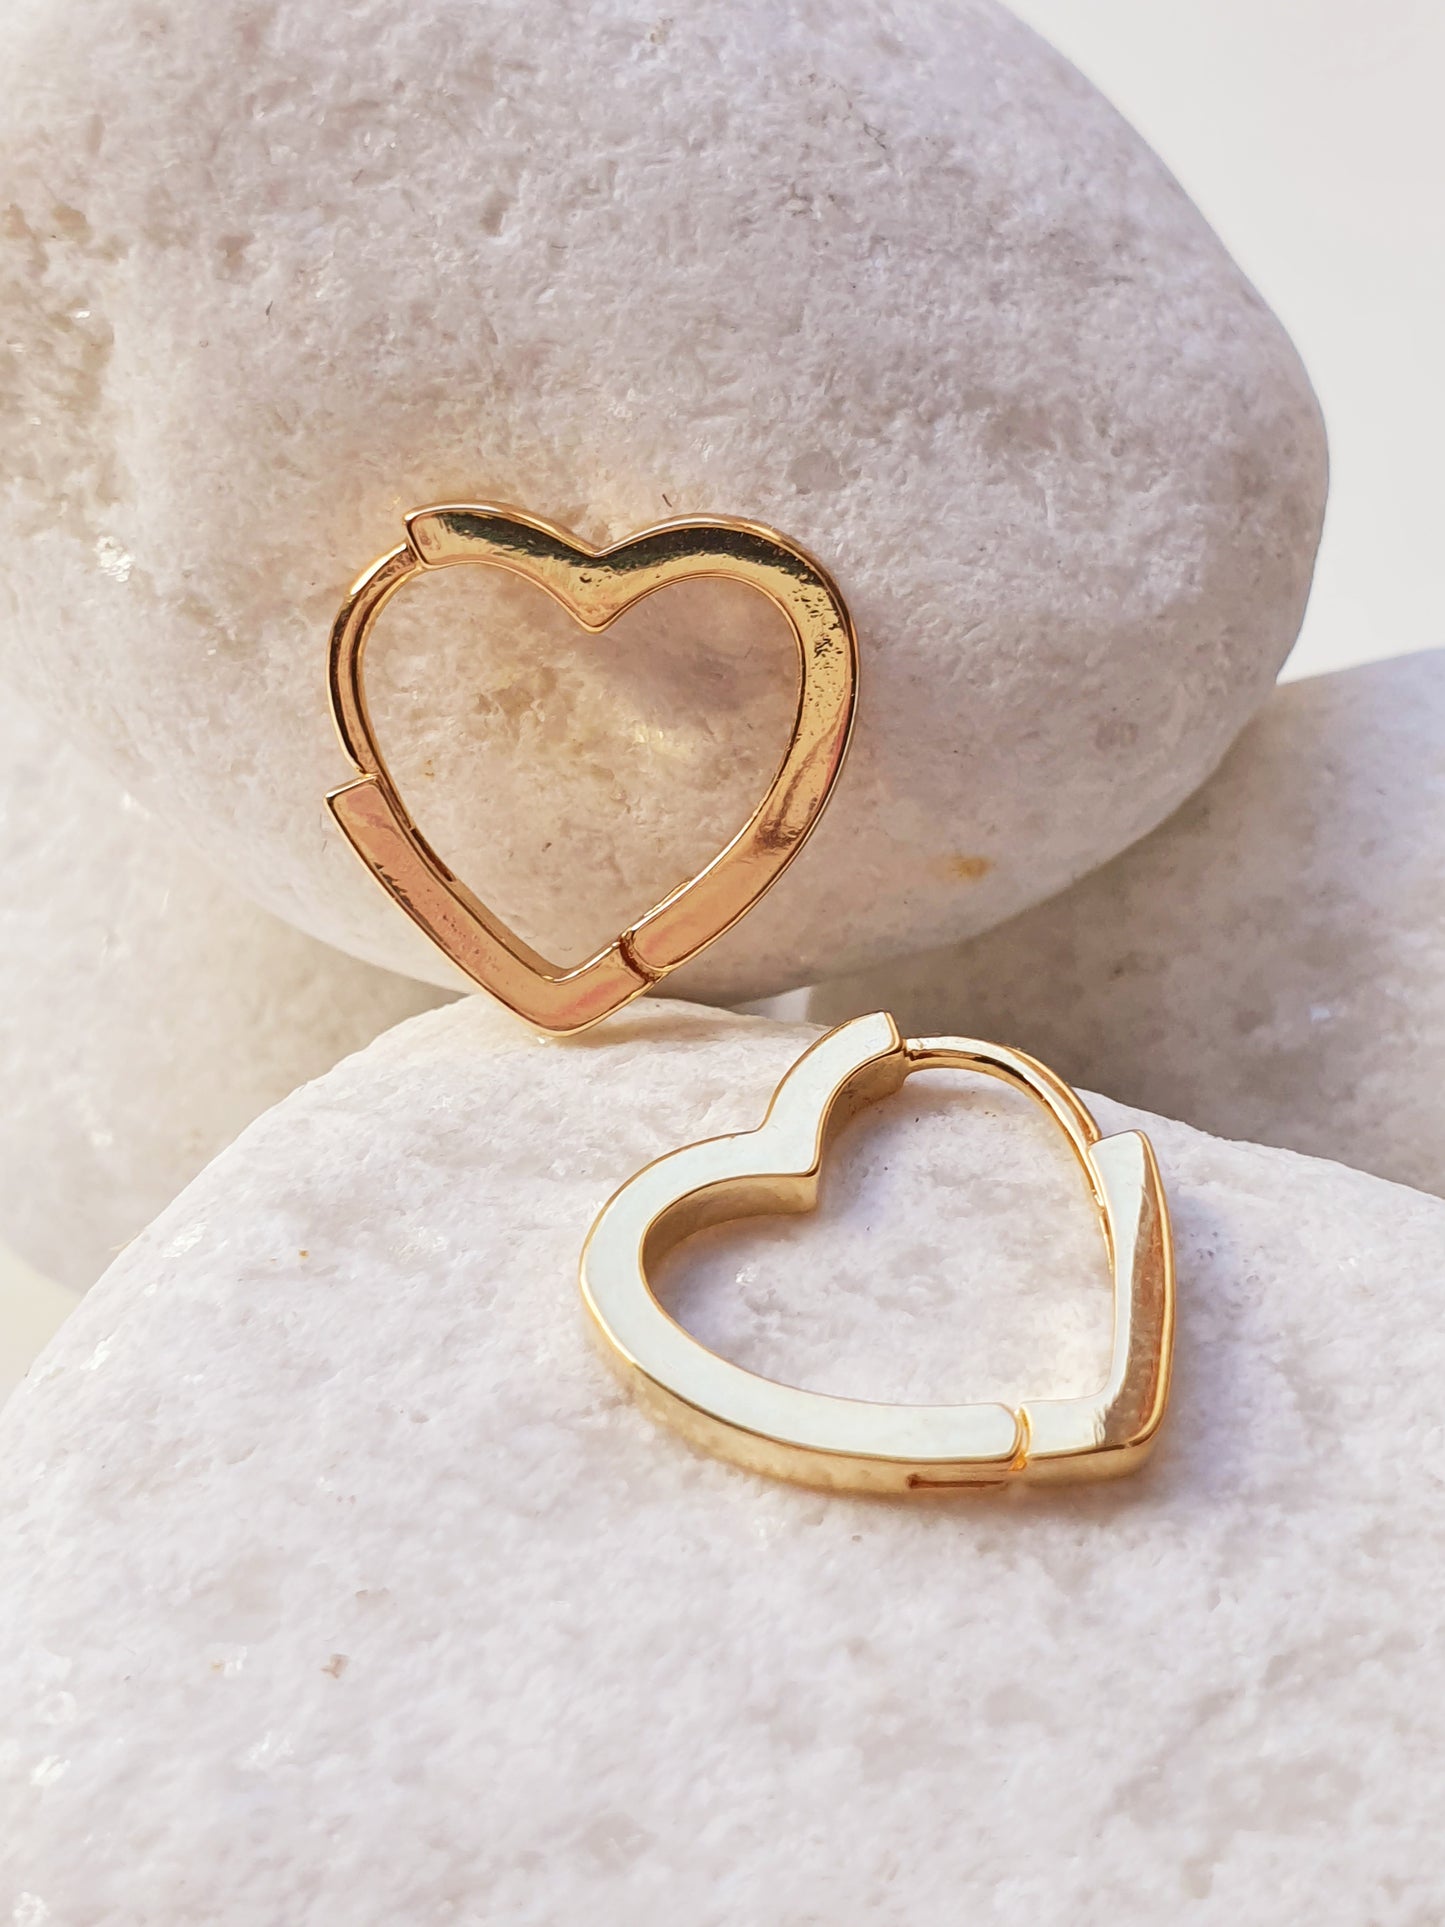 A pair of gold heart shaped huggies sit against white stones